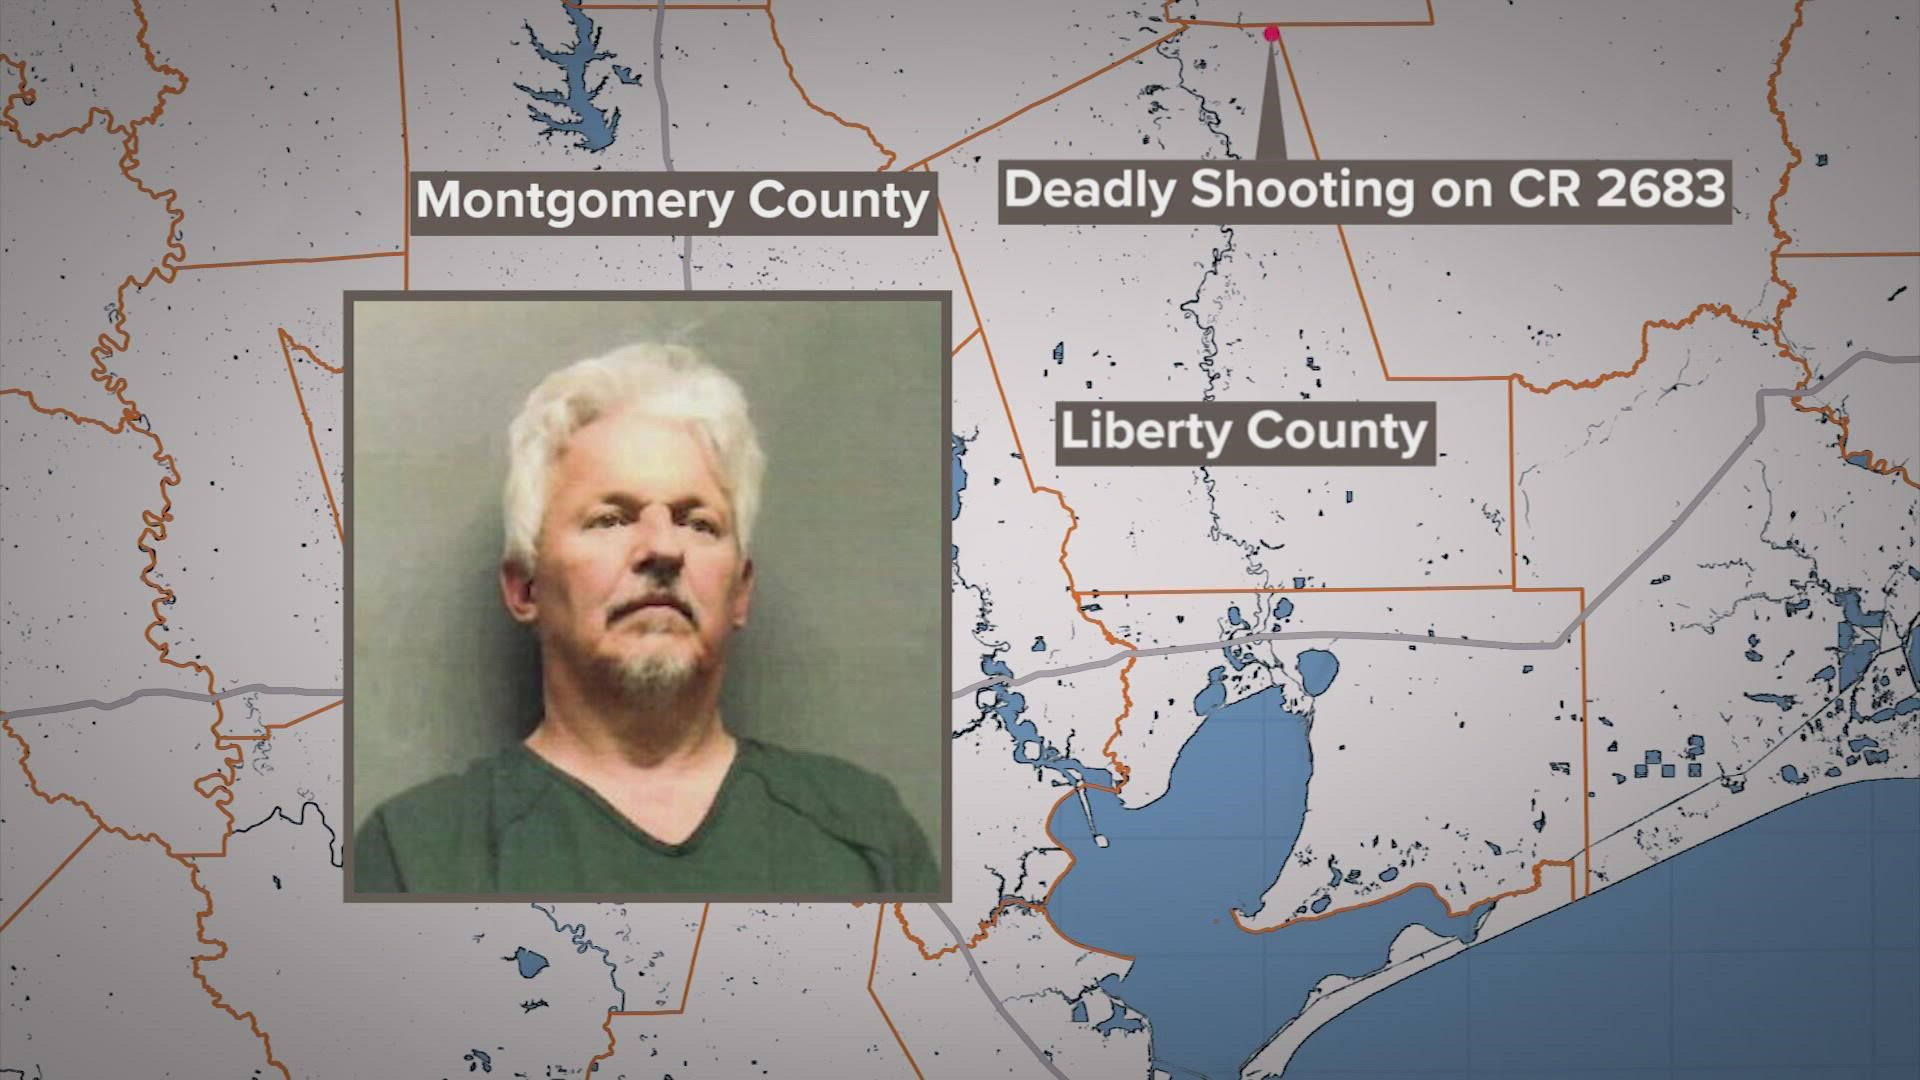 Investigators said Eric Lee Elliott shot the victim once in the stomach, put the gun in his truck, and continued with his yard work as if nothing had ever happened.